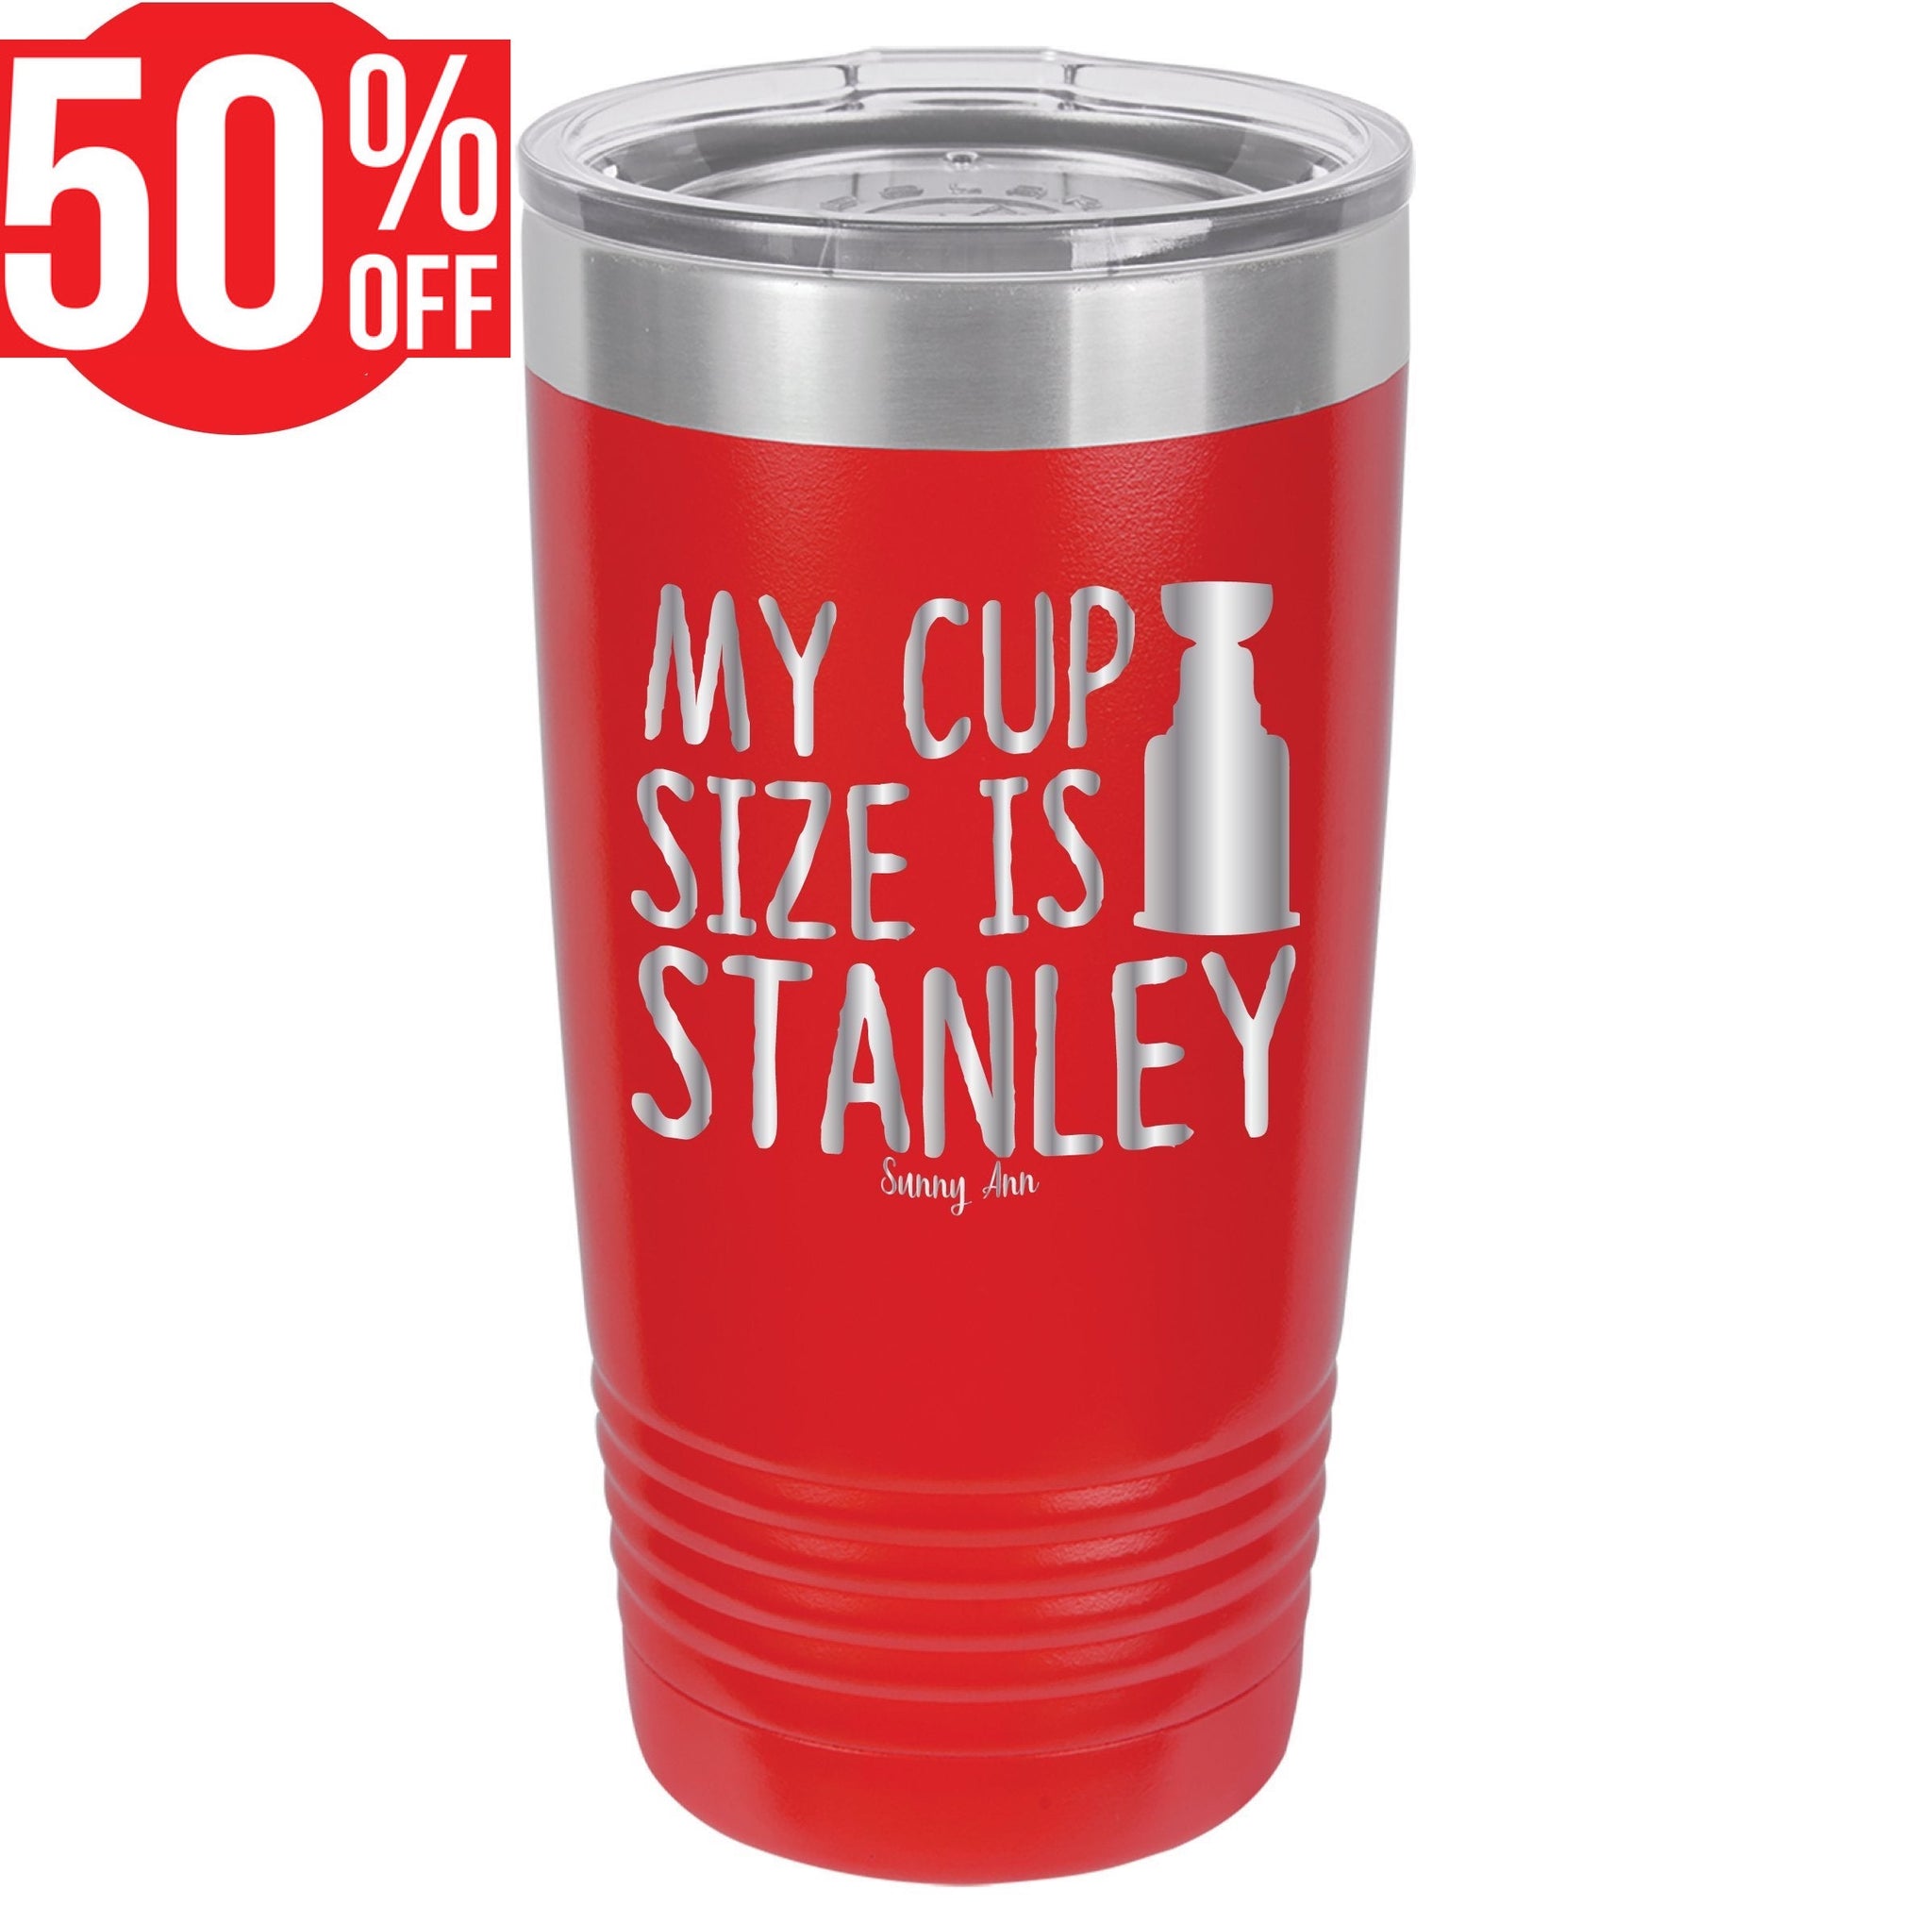 The 20 oz stanley is so cute🥹🌸🌷✨ #stanleycup #shopping #stanleytumb, 20  oz stanley cups